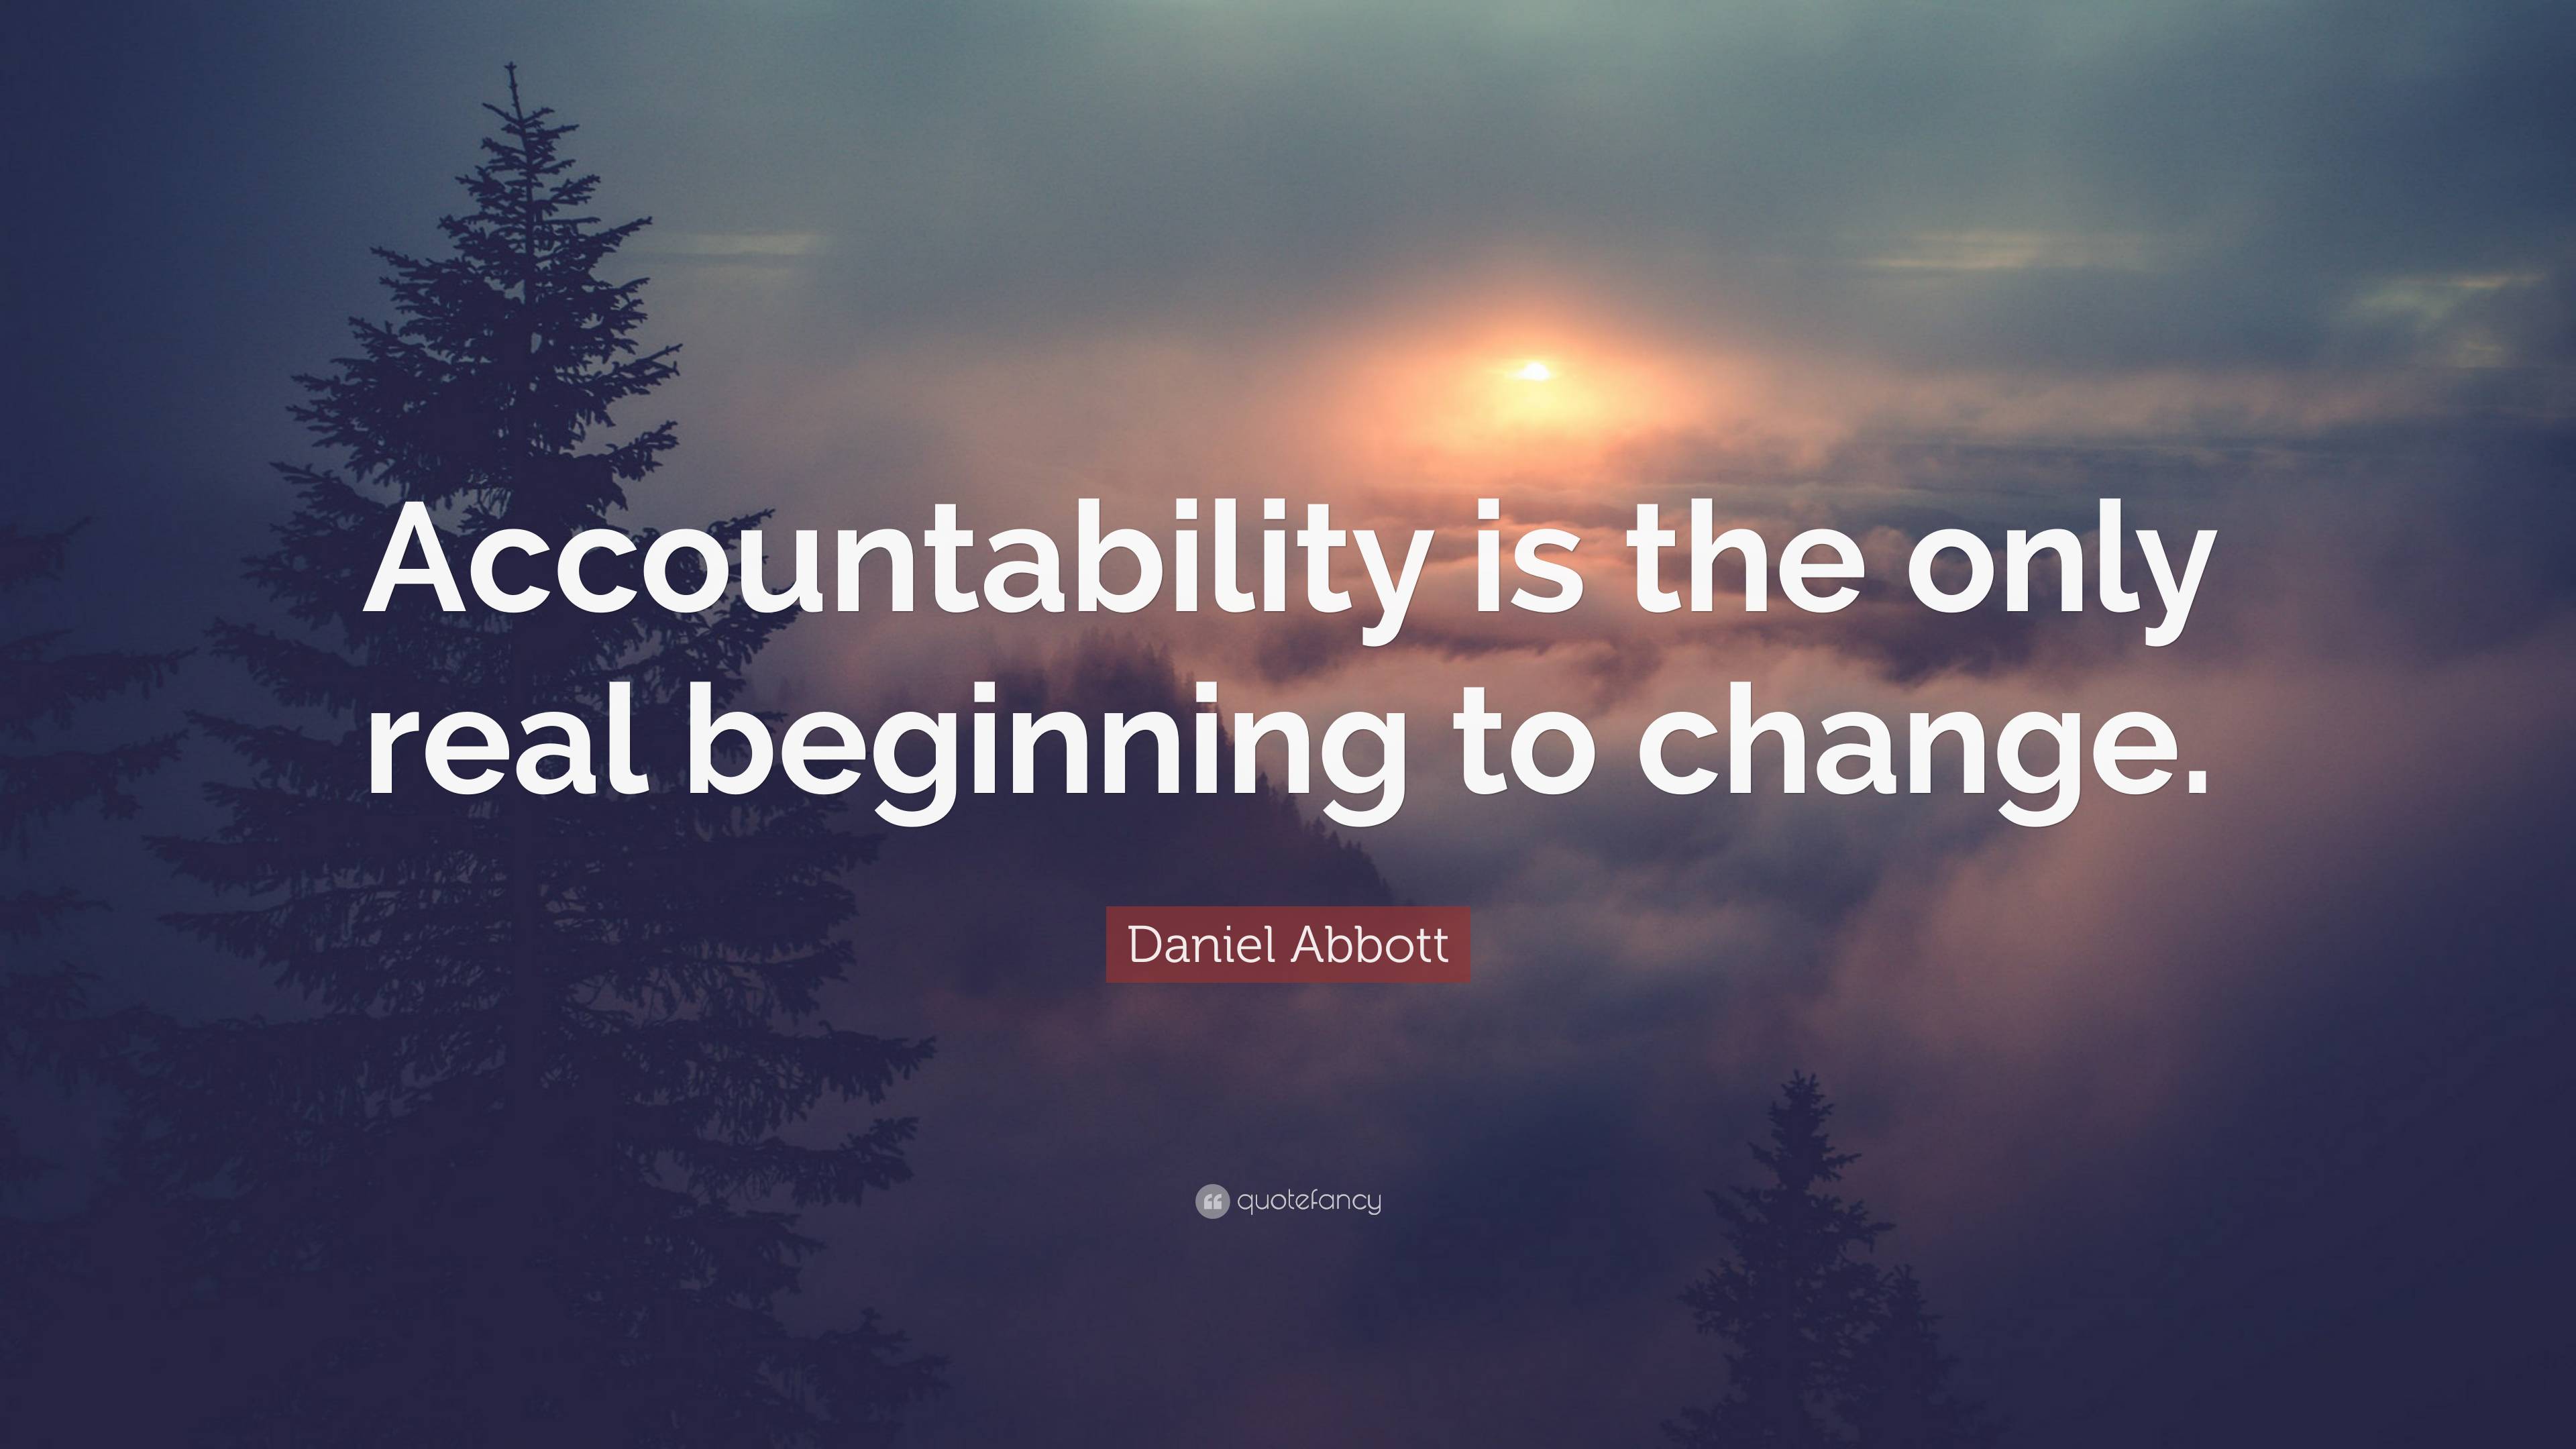 Daniel Abbott Quote: “Accountability is the only real beginning to change.”